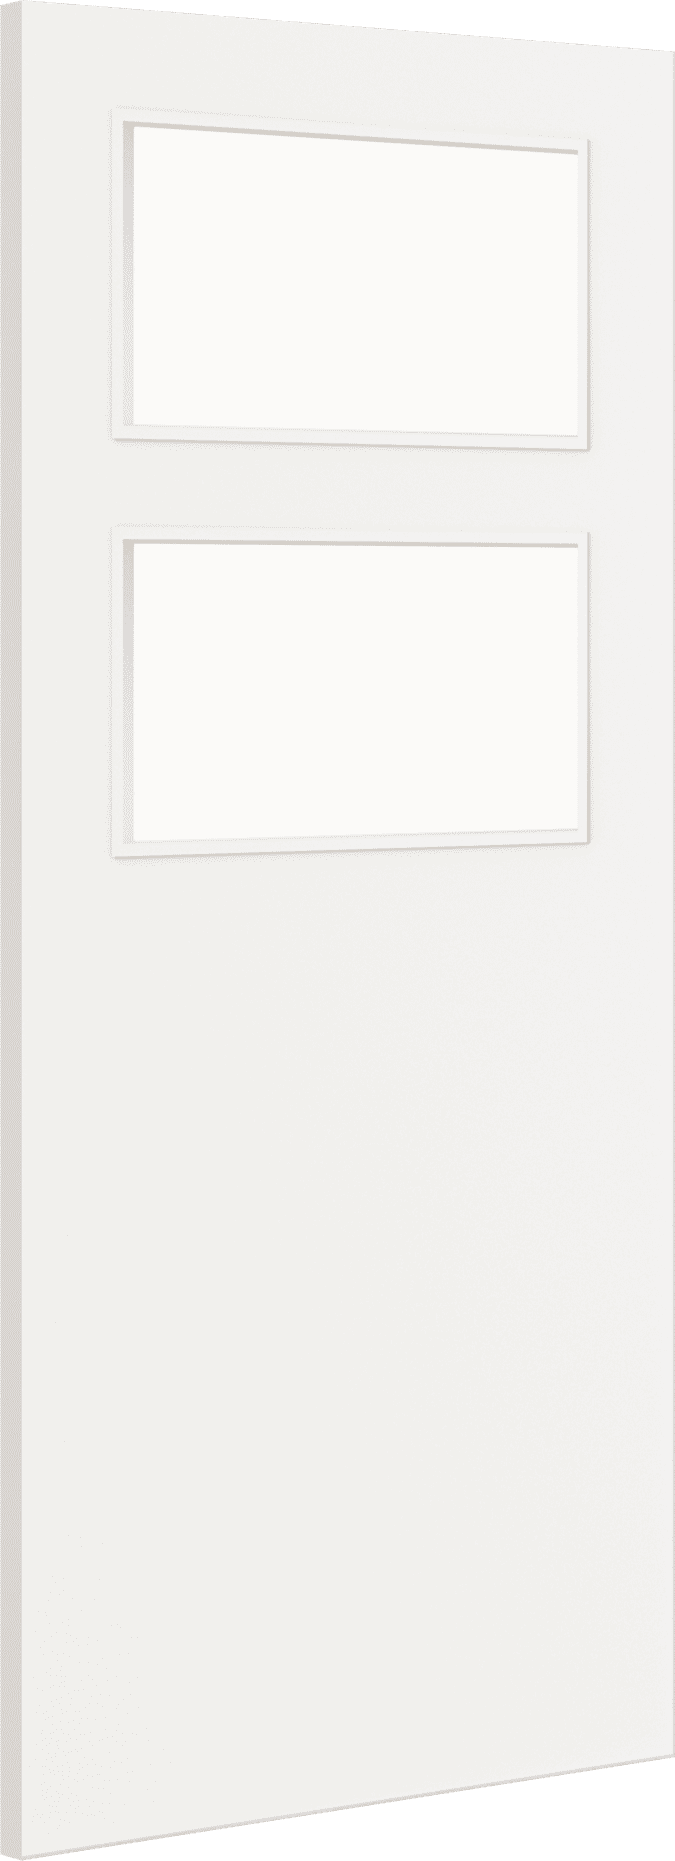 1981mm x 914mm x 44mm (36") Architectural Paint Grade White 02 Clear Glazed Fire Door Blank